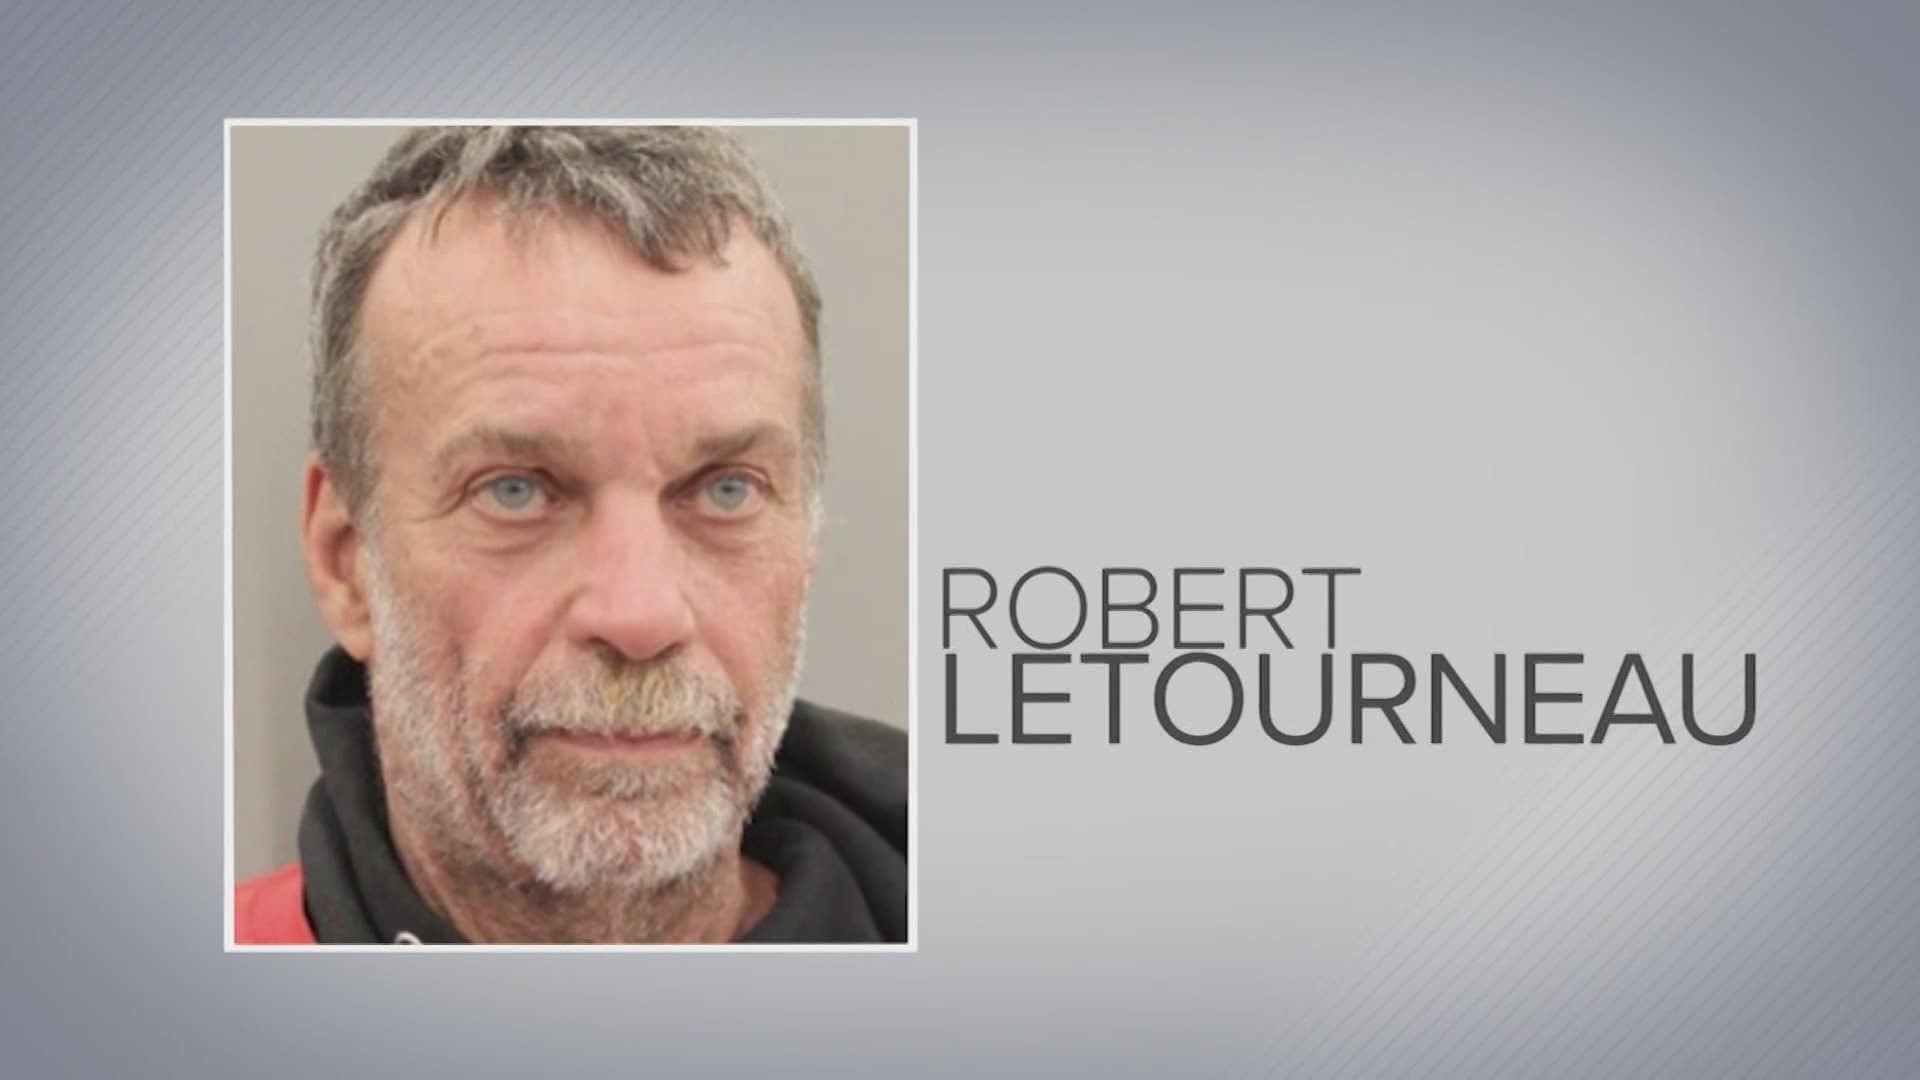 Robert Gordon Letourneau, 61, was arrested multiple times after violently harassing, and at one point, allegedly kidnapping and robbing his ex-girlfriend in 2019.